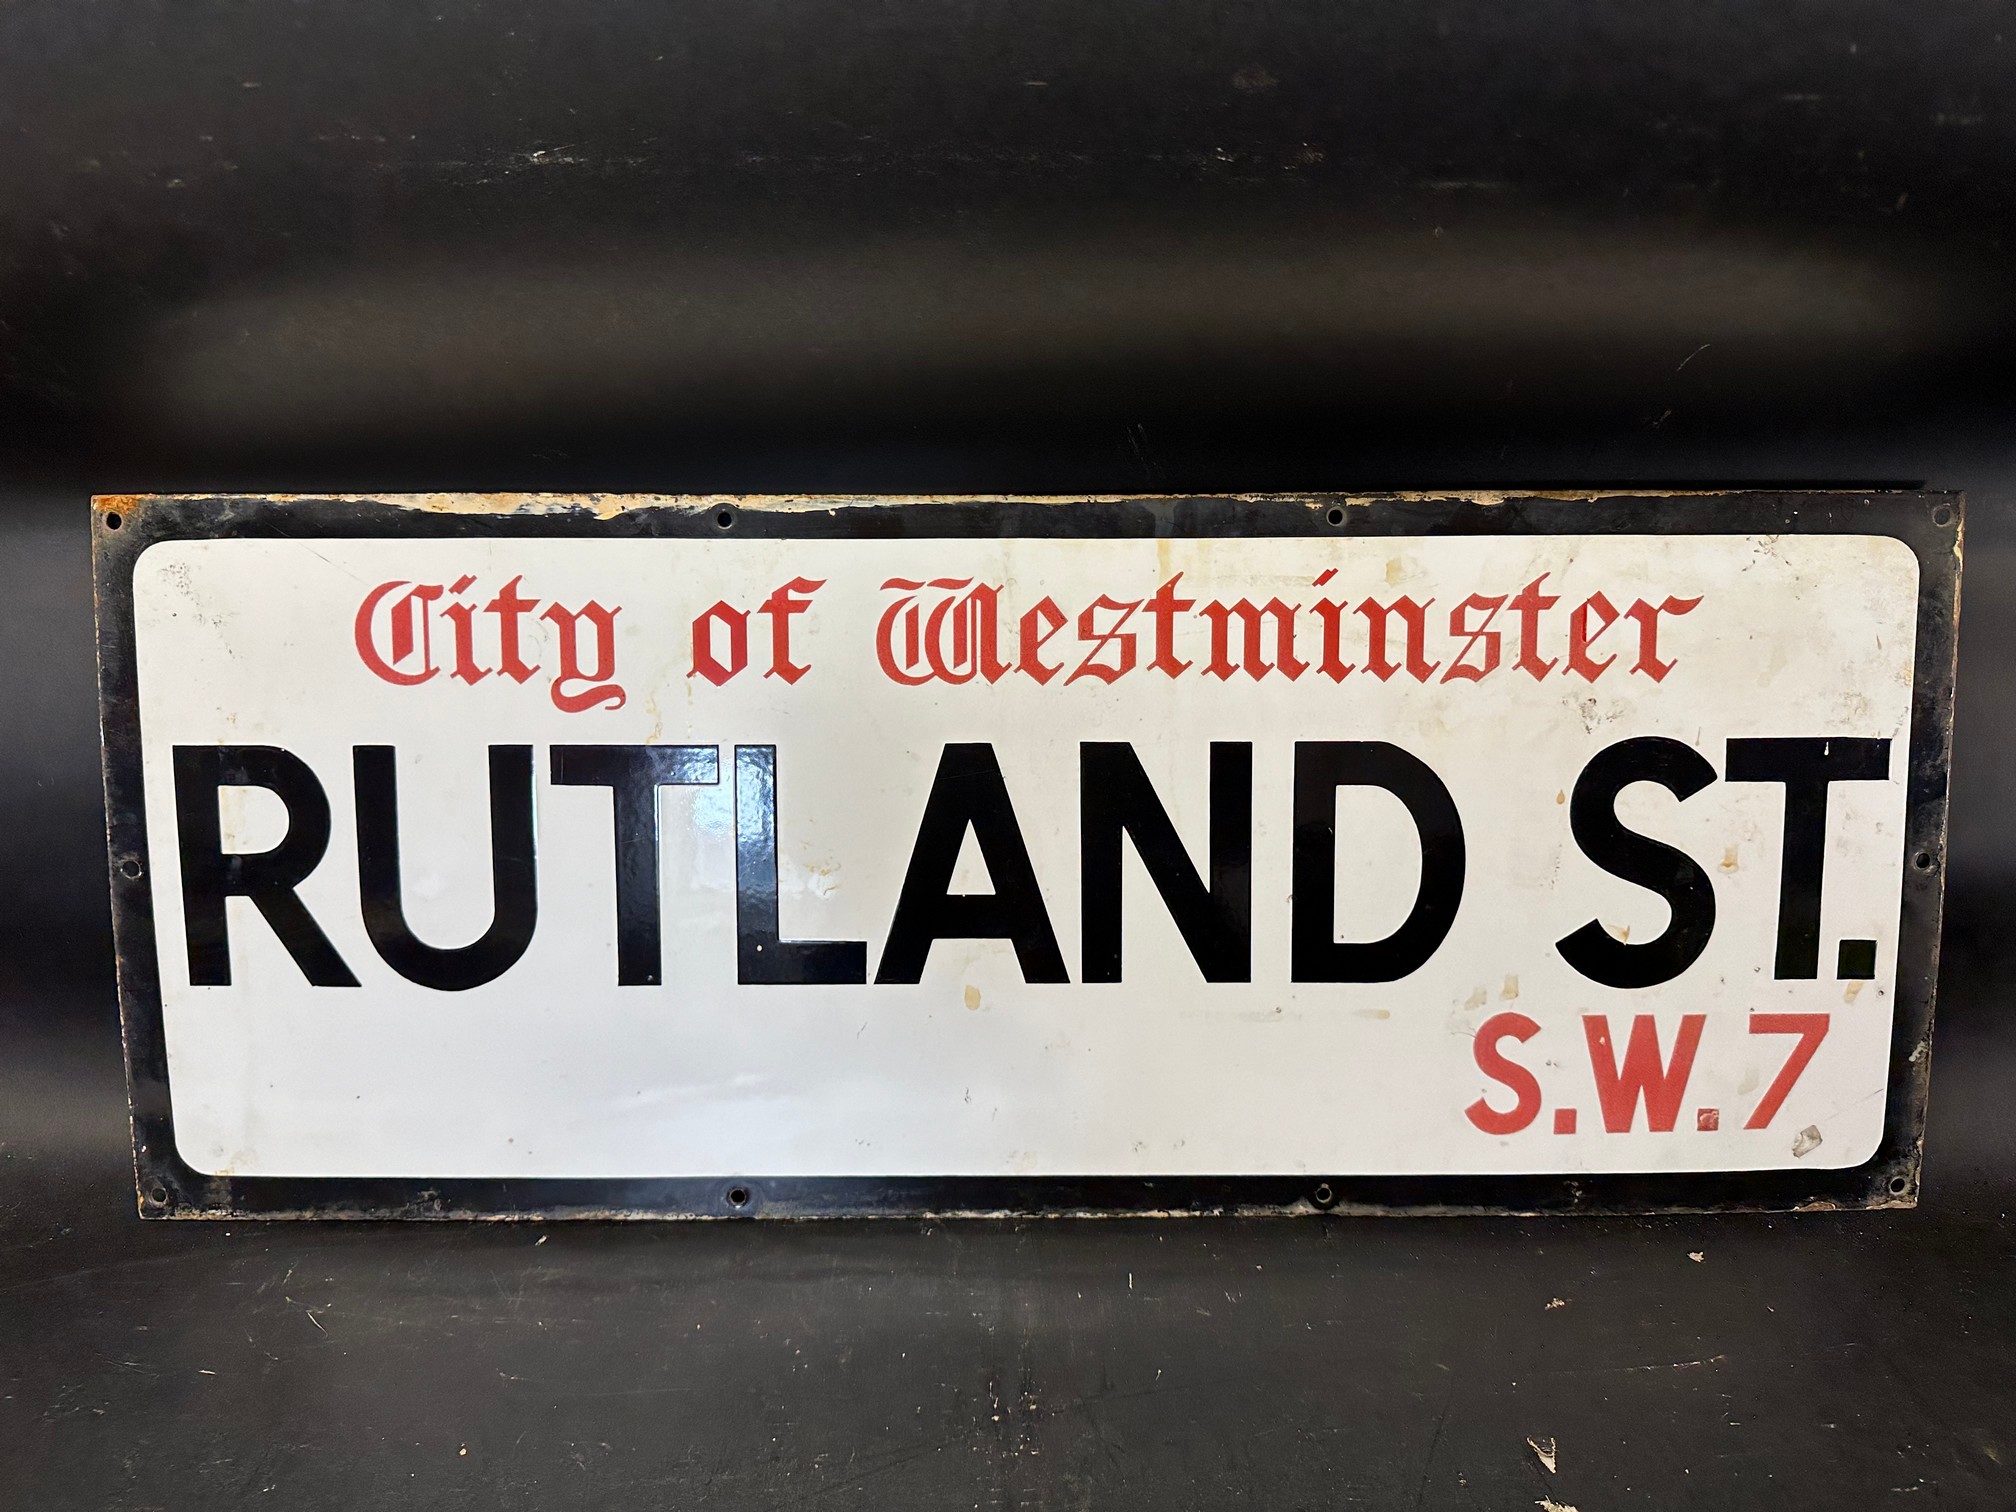 A City of Westminster enamel road sign for Rutland St. S.W.7, 30 x 12".